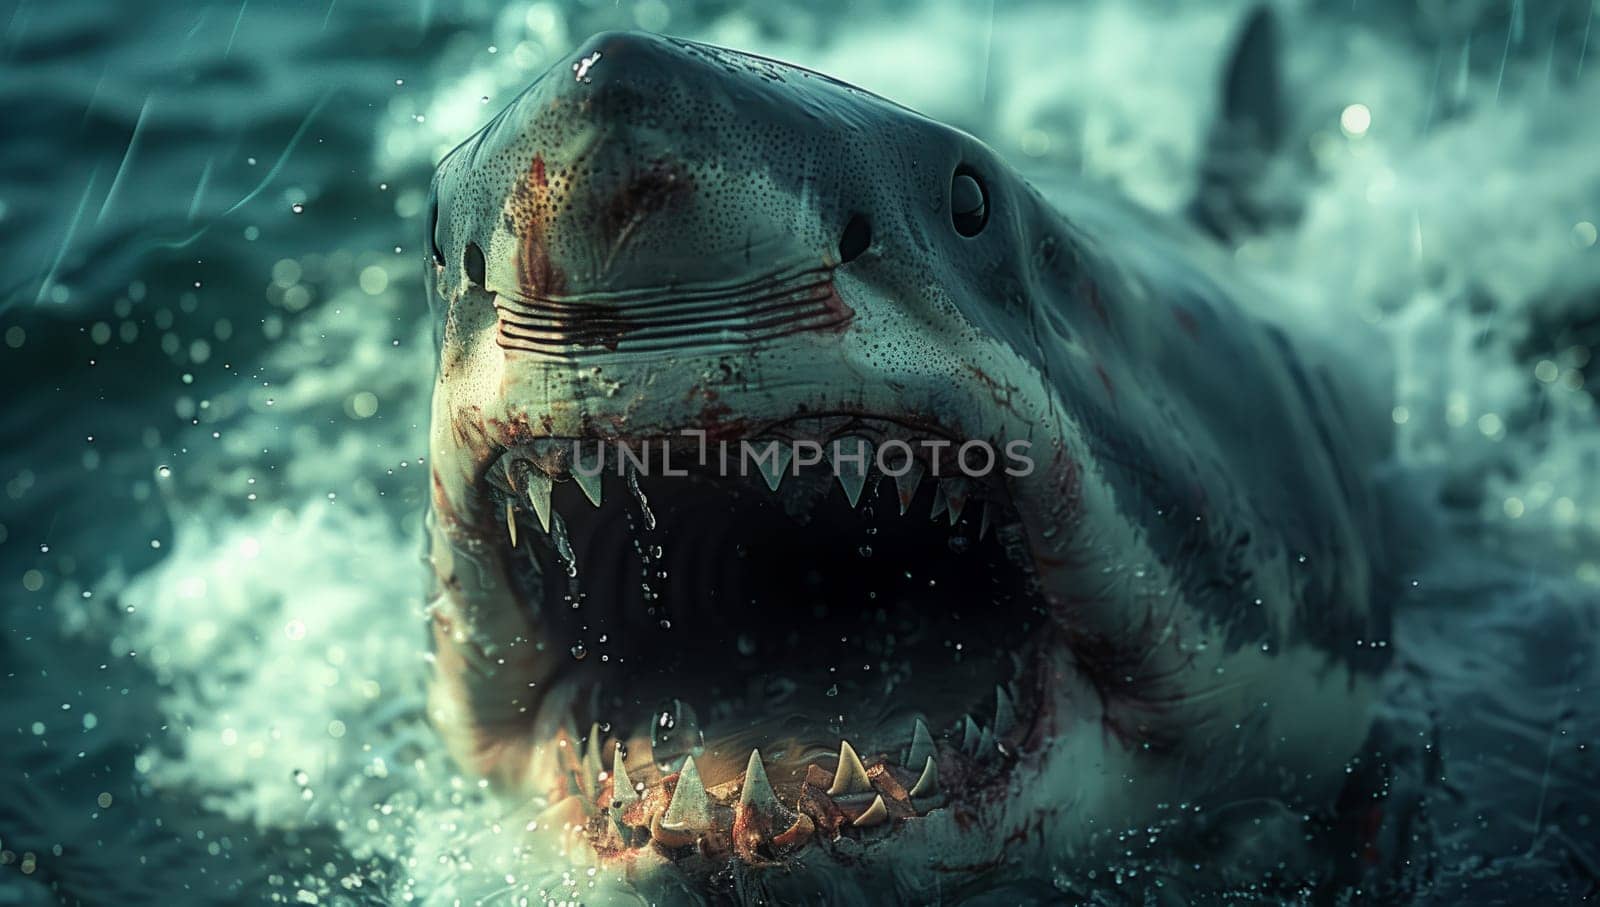 A great white shark, a marine organism with powerful jaws and sharp fangs, swims underwater with its mouth open, filtering water to extract fluid and prey